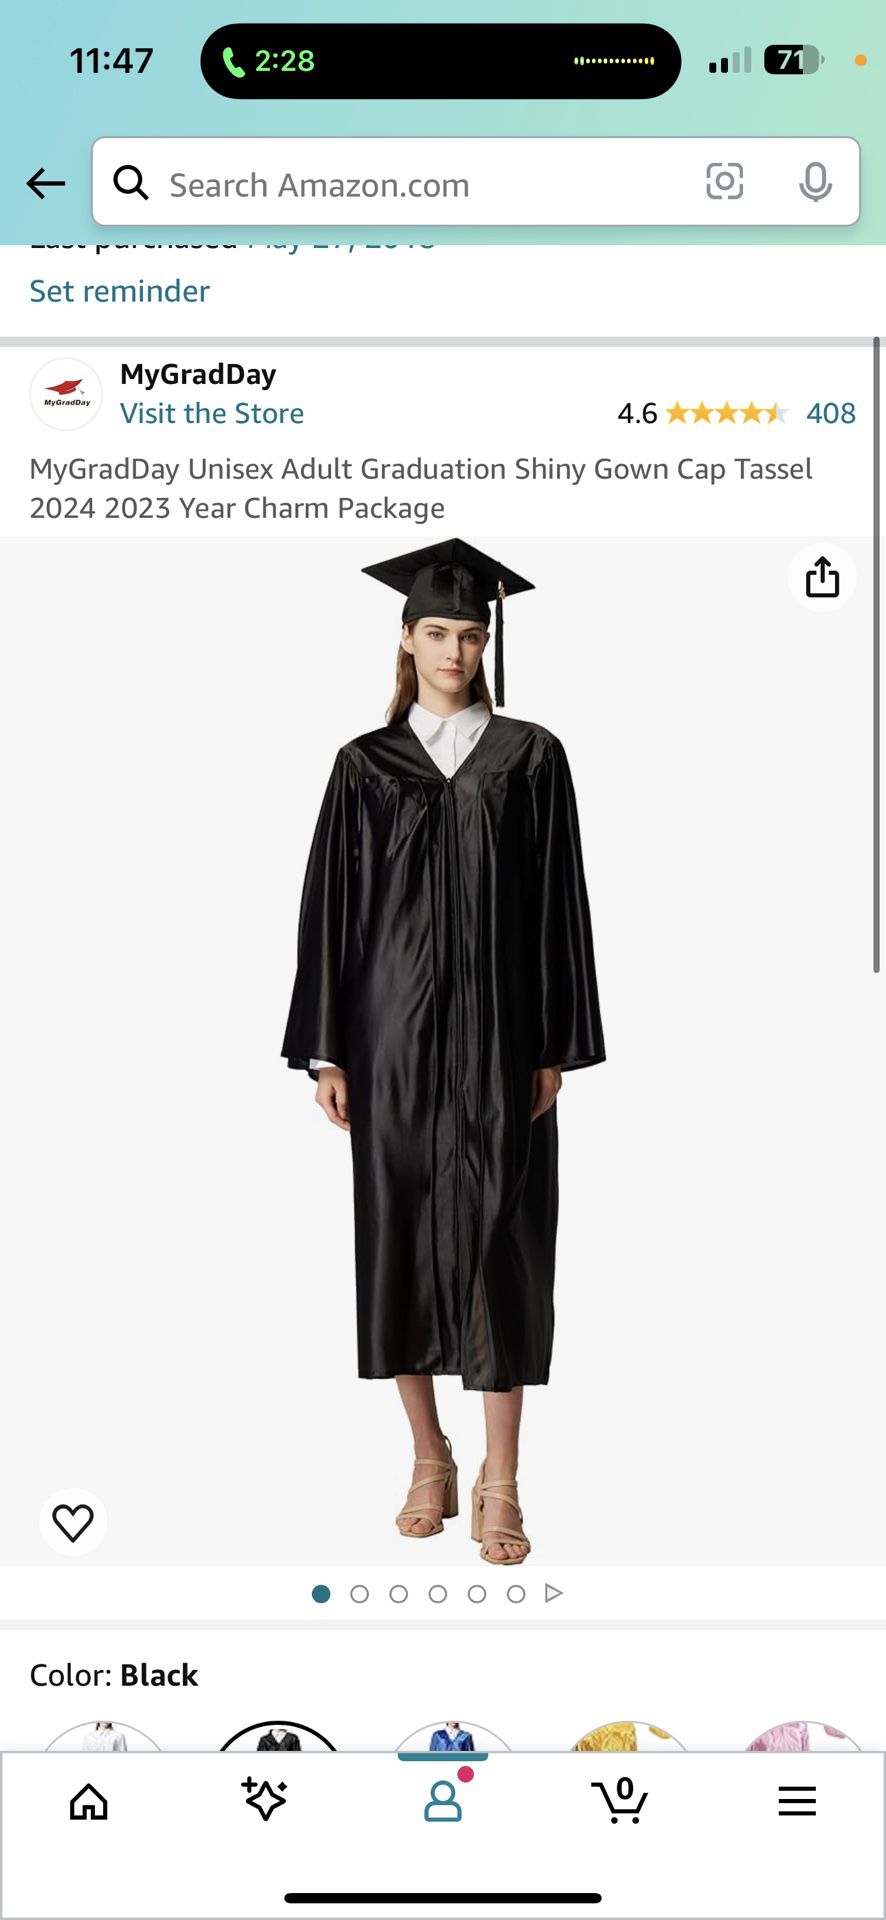 Black Cap Gown and Tassle (doesn’t say graduating year)